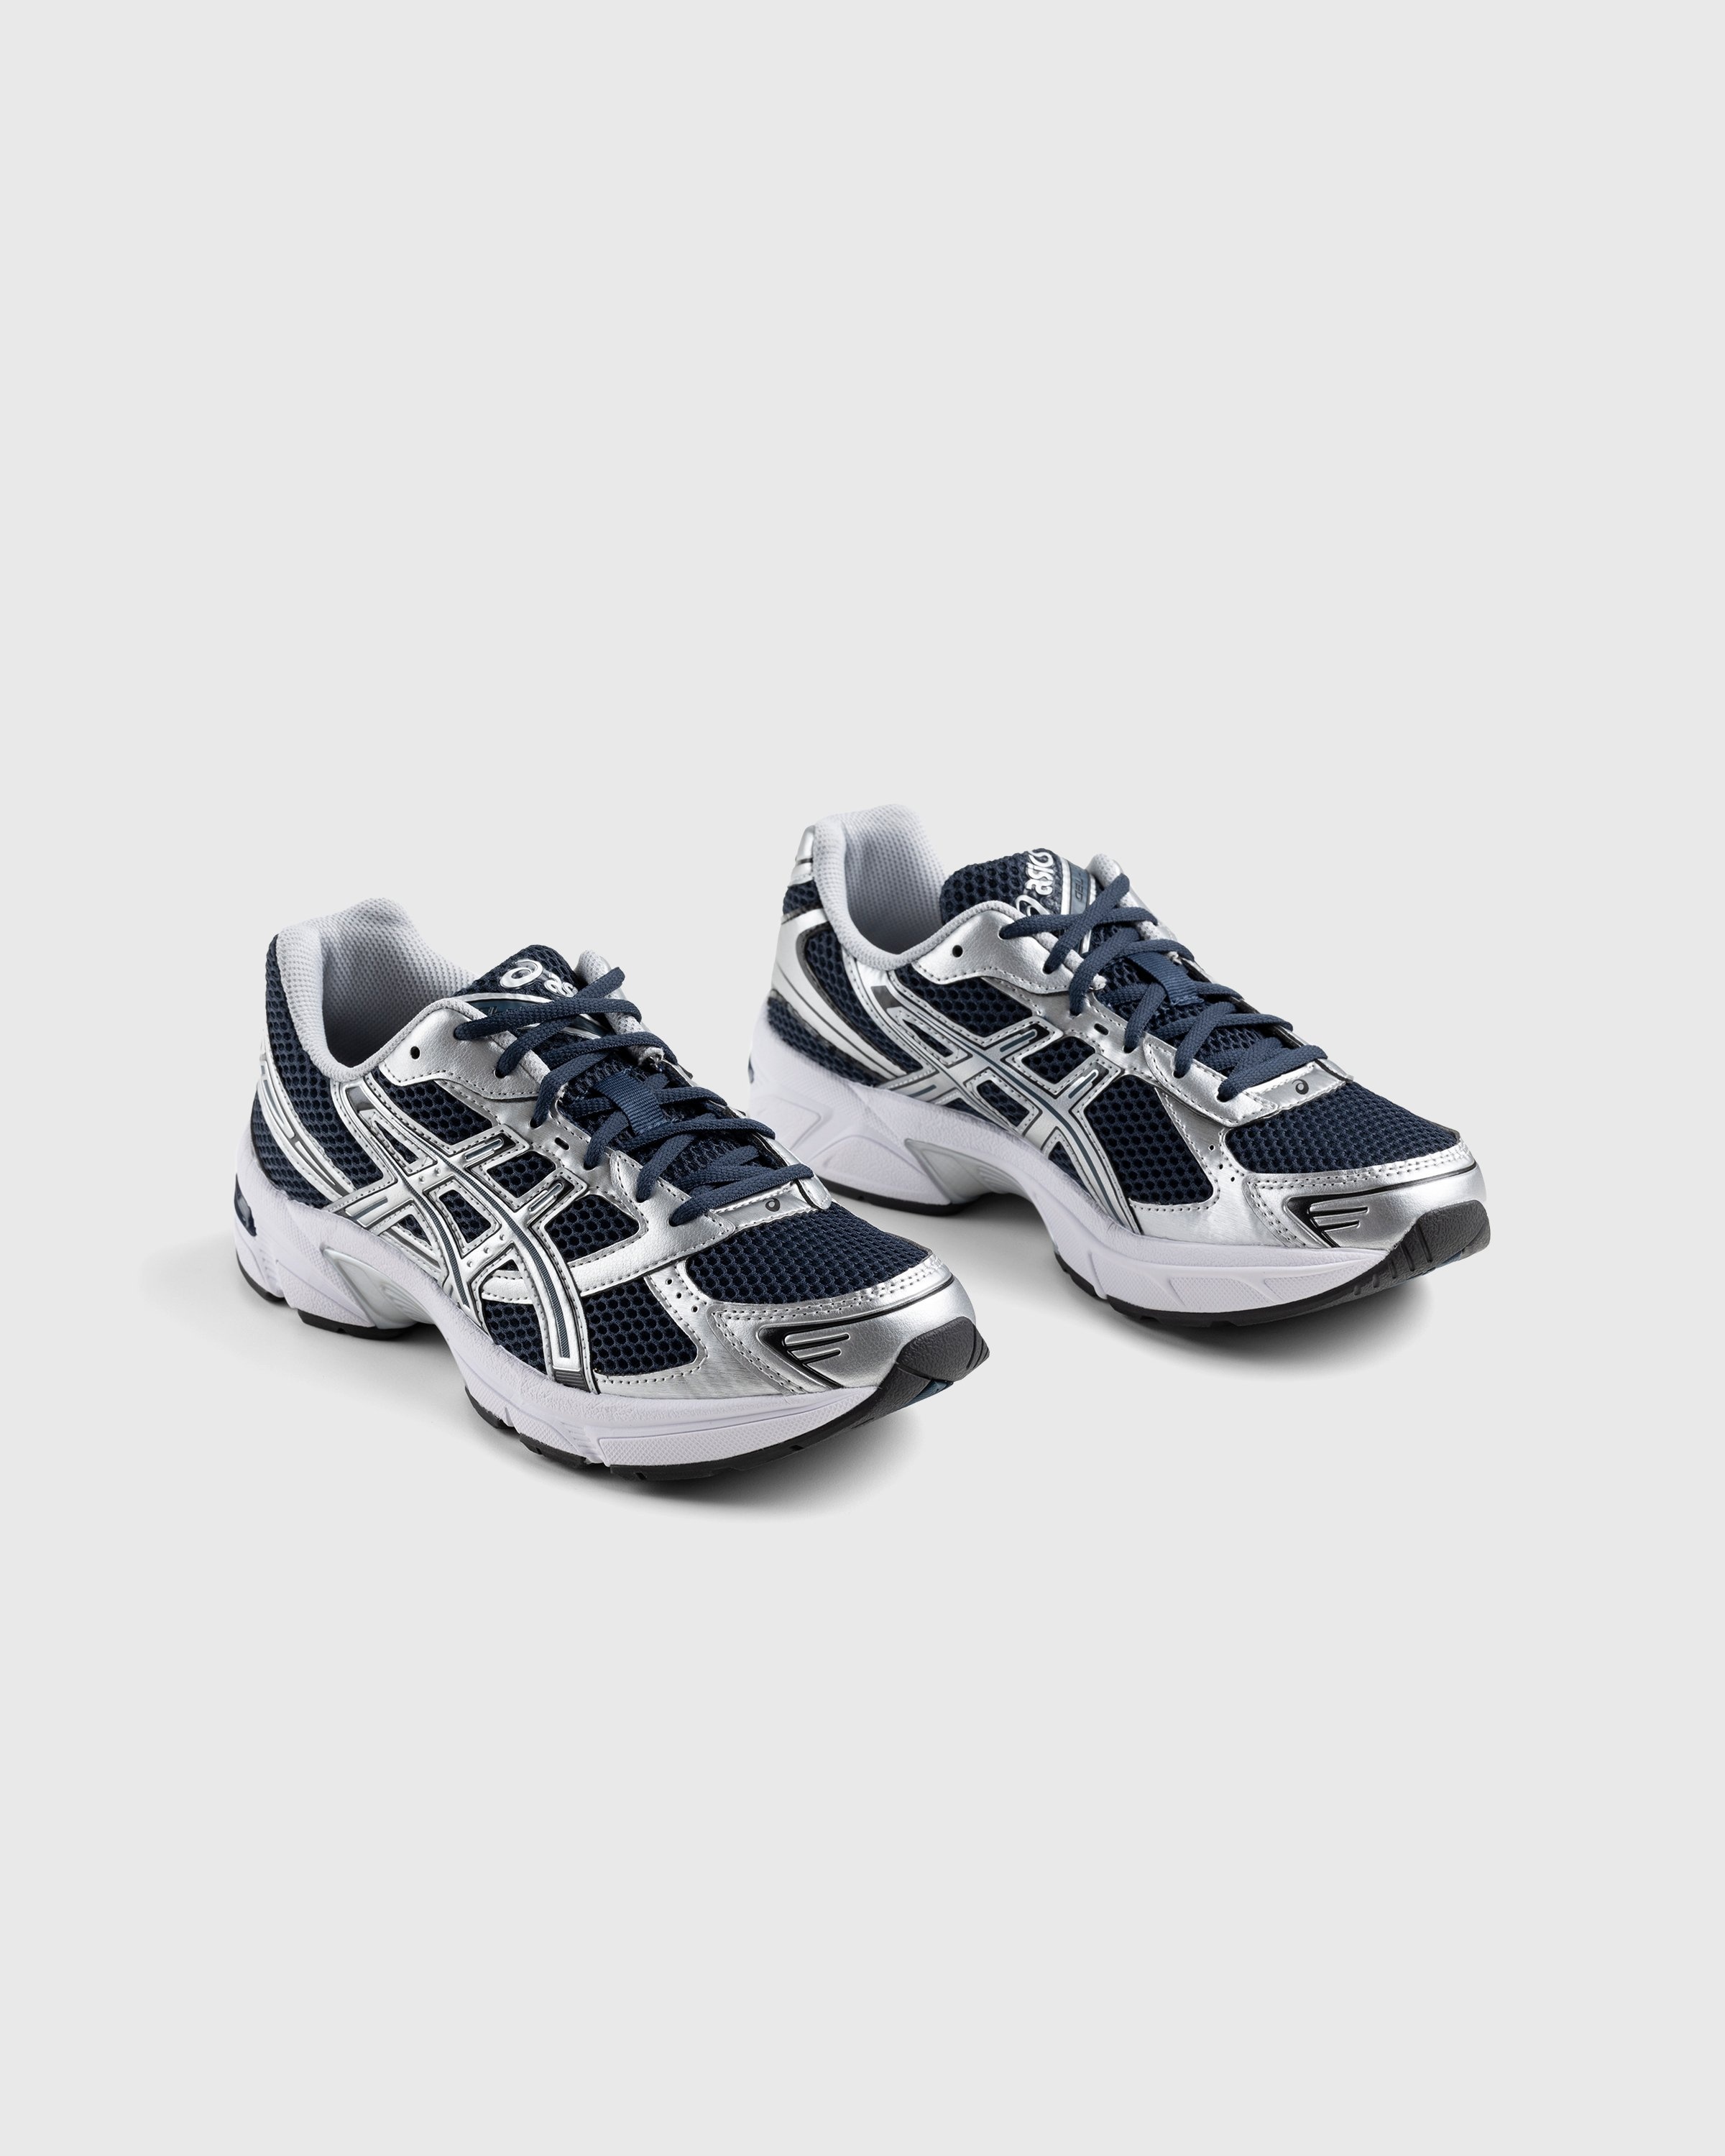 asics – GEL-1130 French Blue/Pure Silver - Sneakers - Blue - Image 3